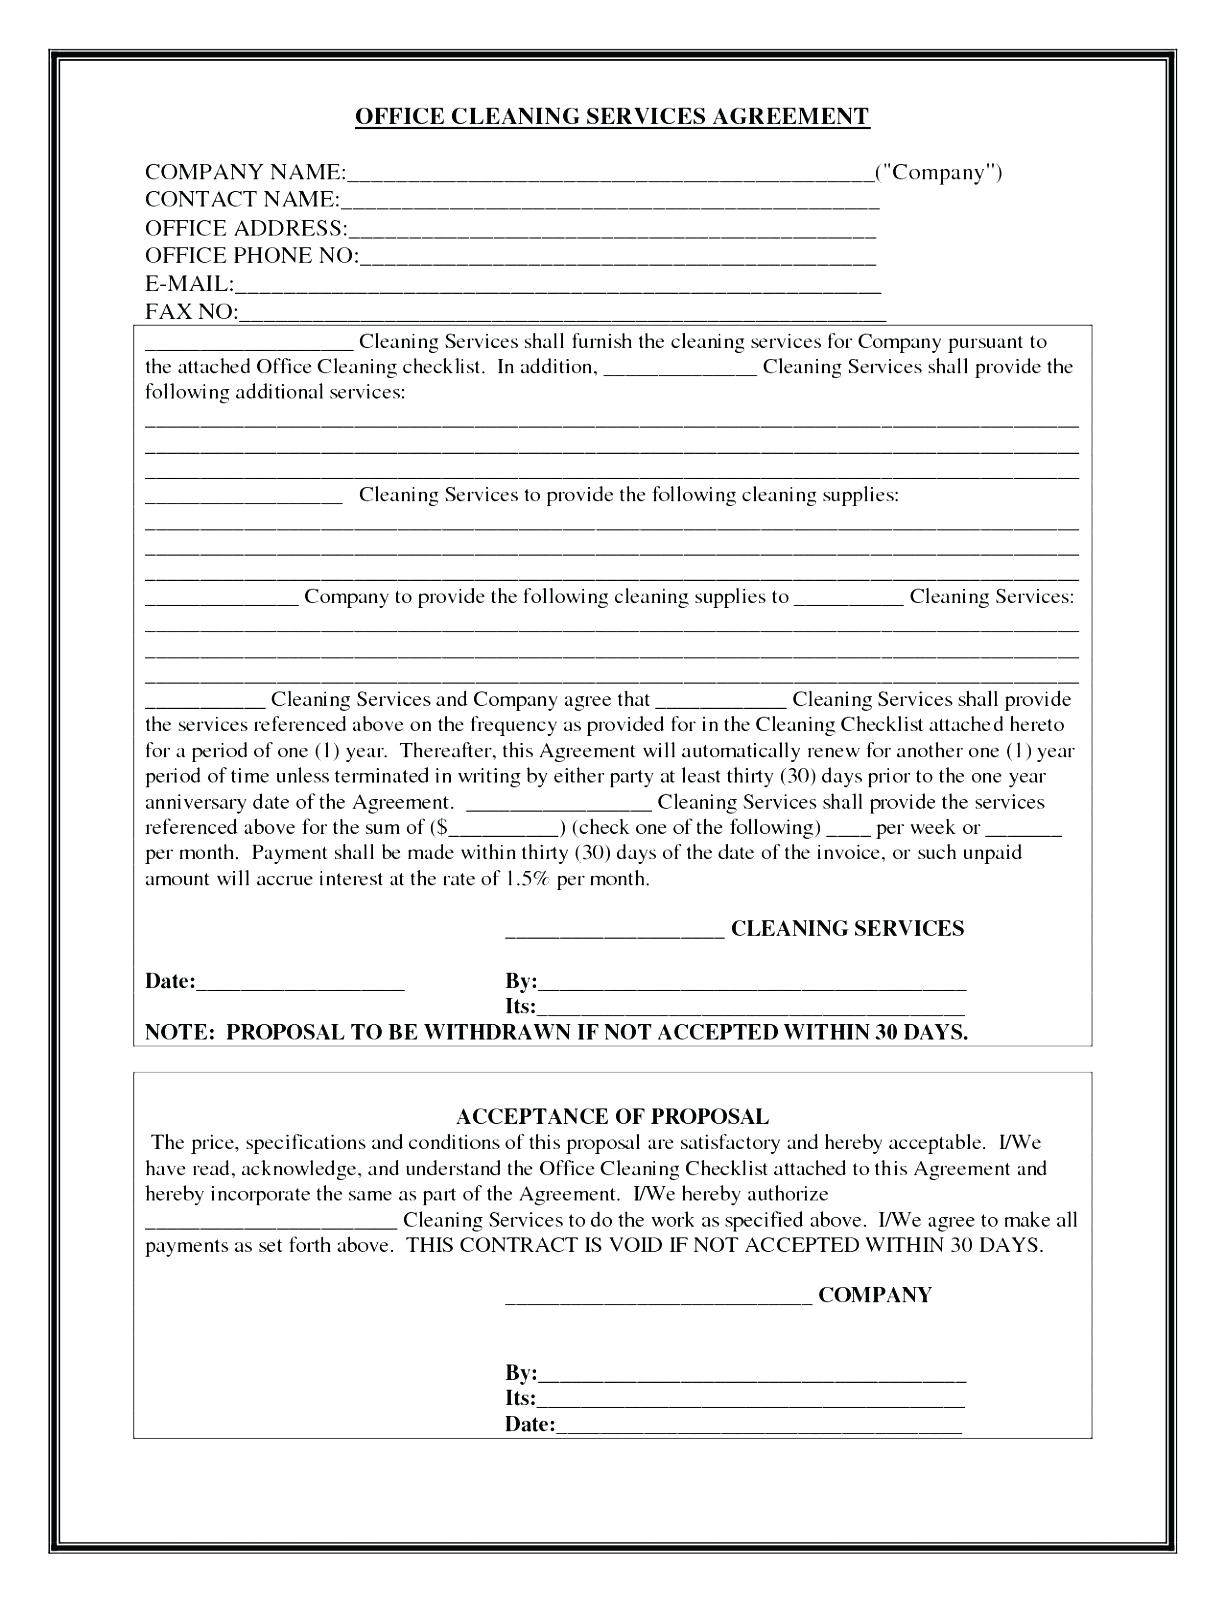 management services agreement template